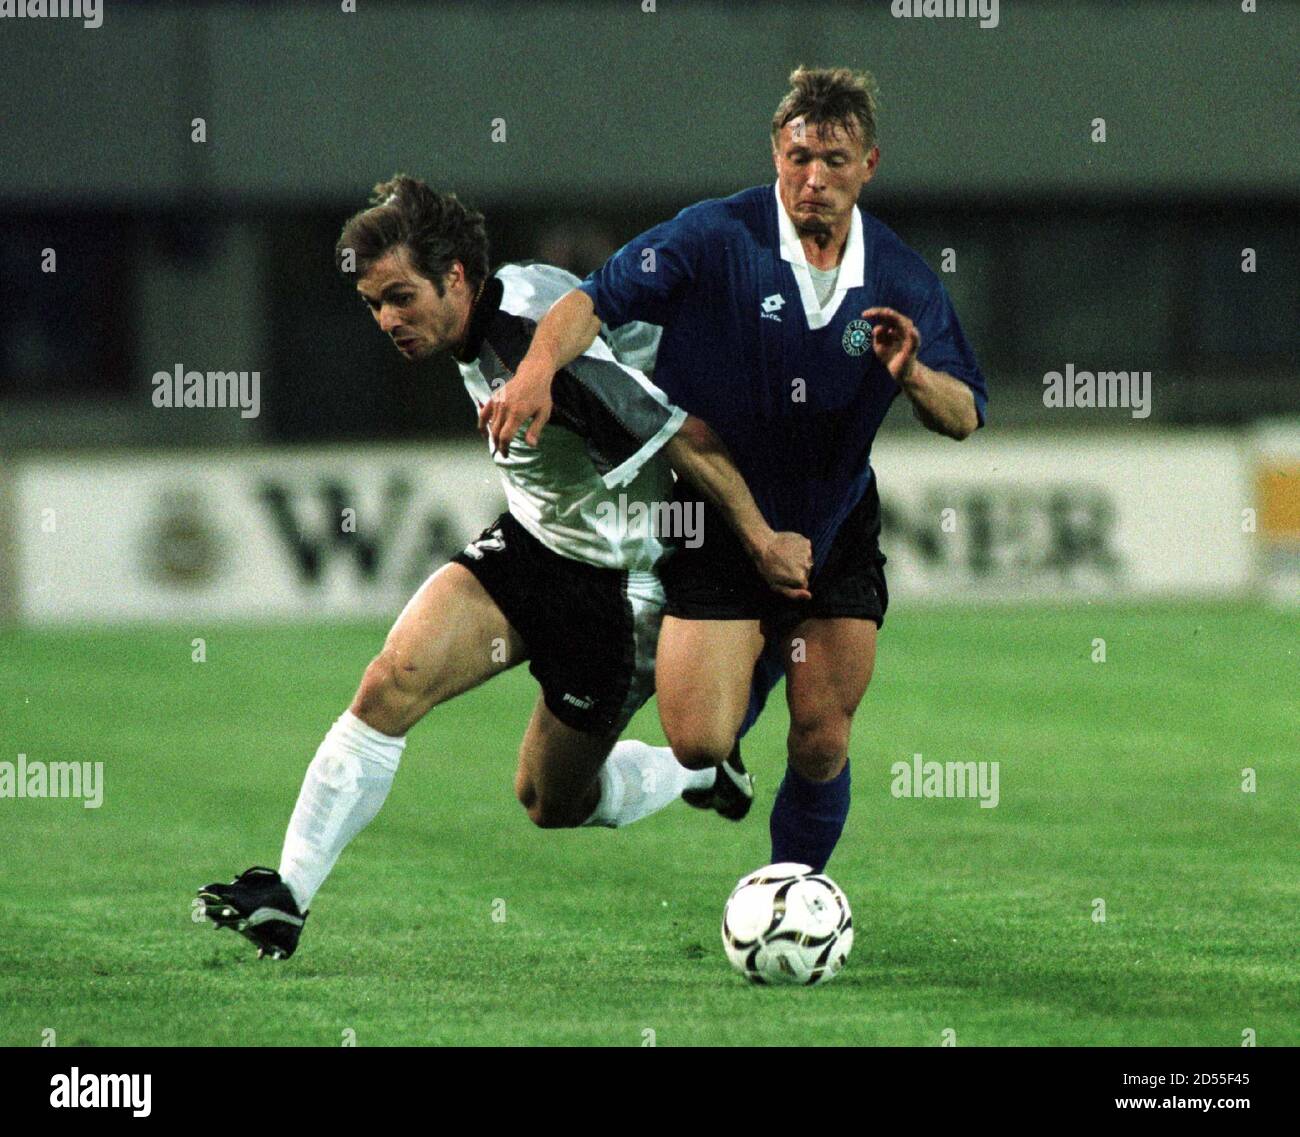 Austria's Harald Cerny (L) and Estonia's Viktor Alonen fight for the ball during their soccer world championship qualifying match, April 30.  SPORT SOCCER Stock Photo